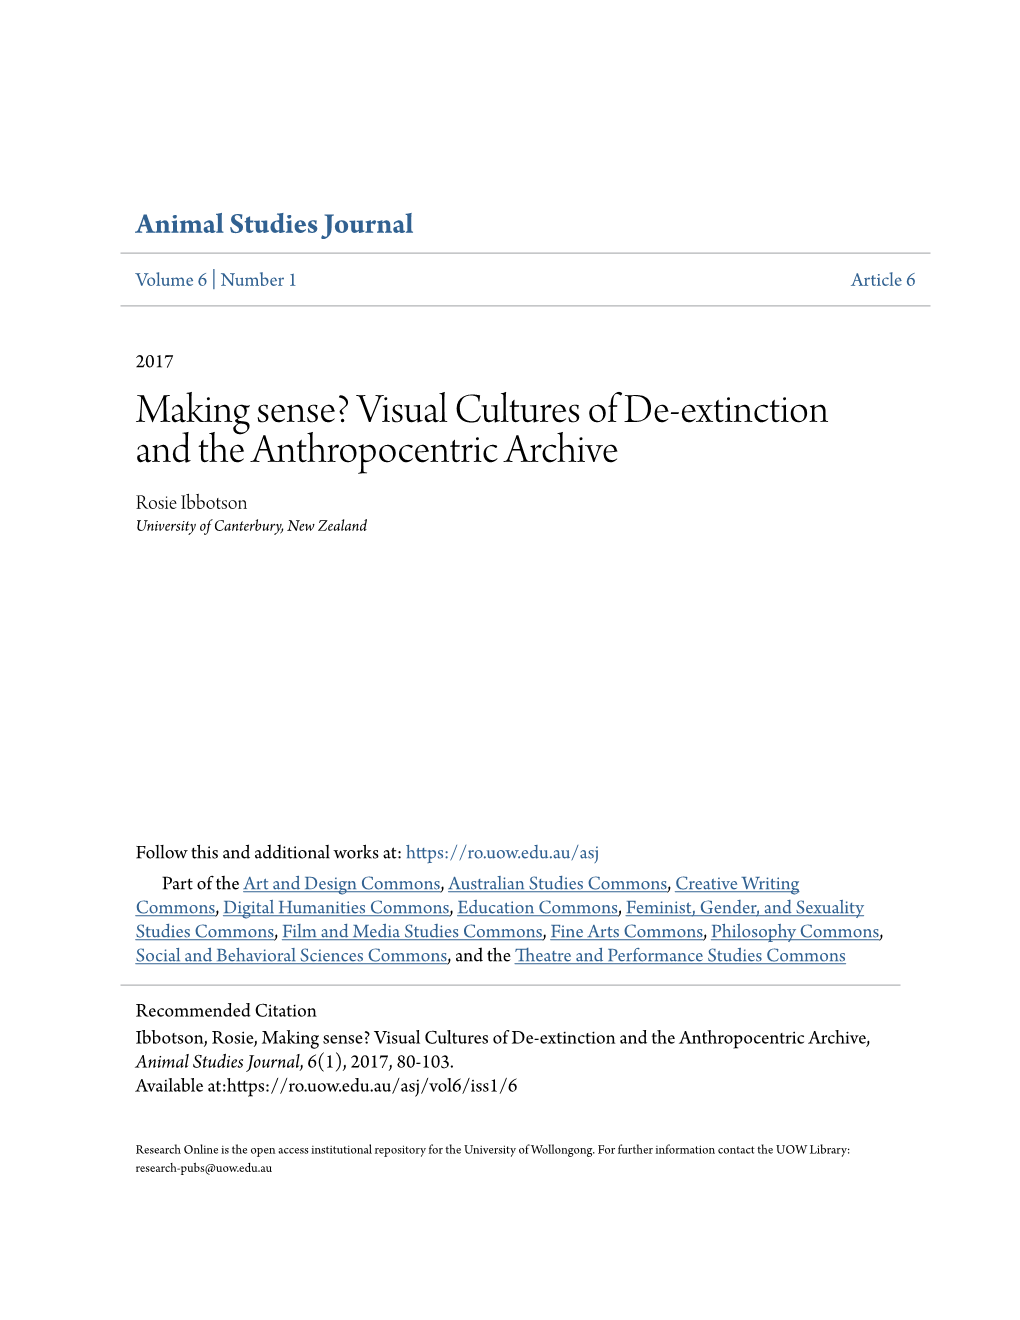 Visual Cultures of De-Extinction and the Anthropocentric Archive Rosie Ibbotson University of Canterbury, New Zealand